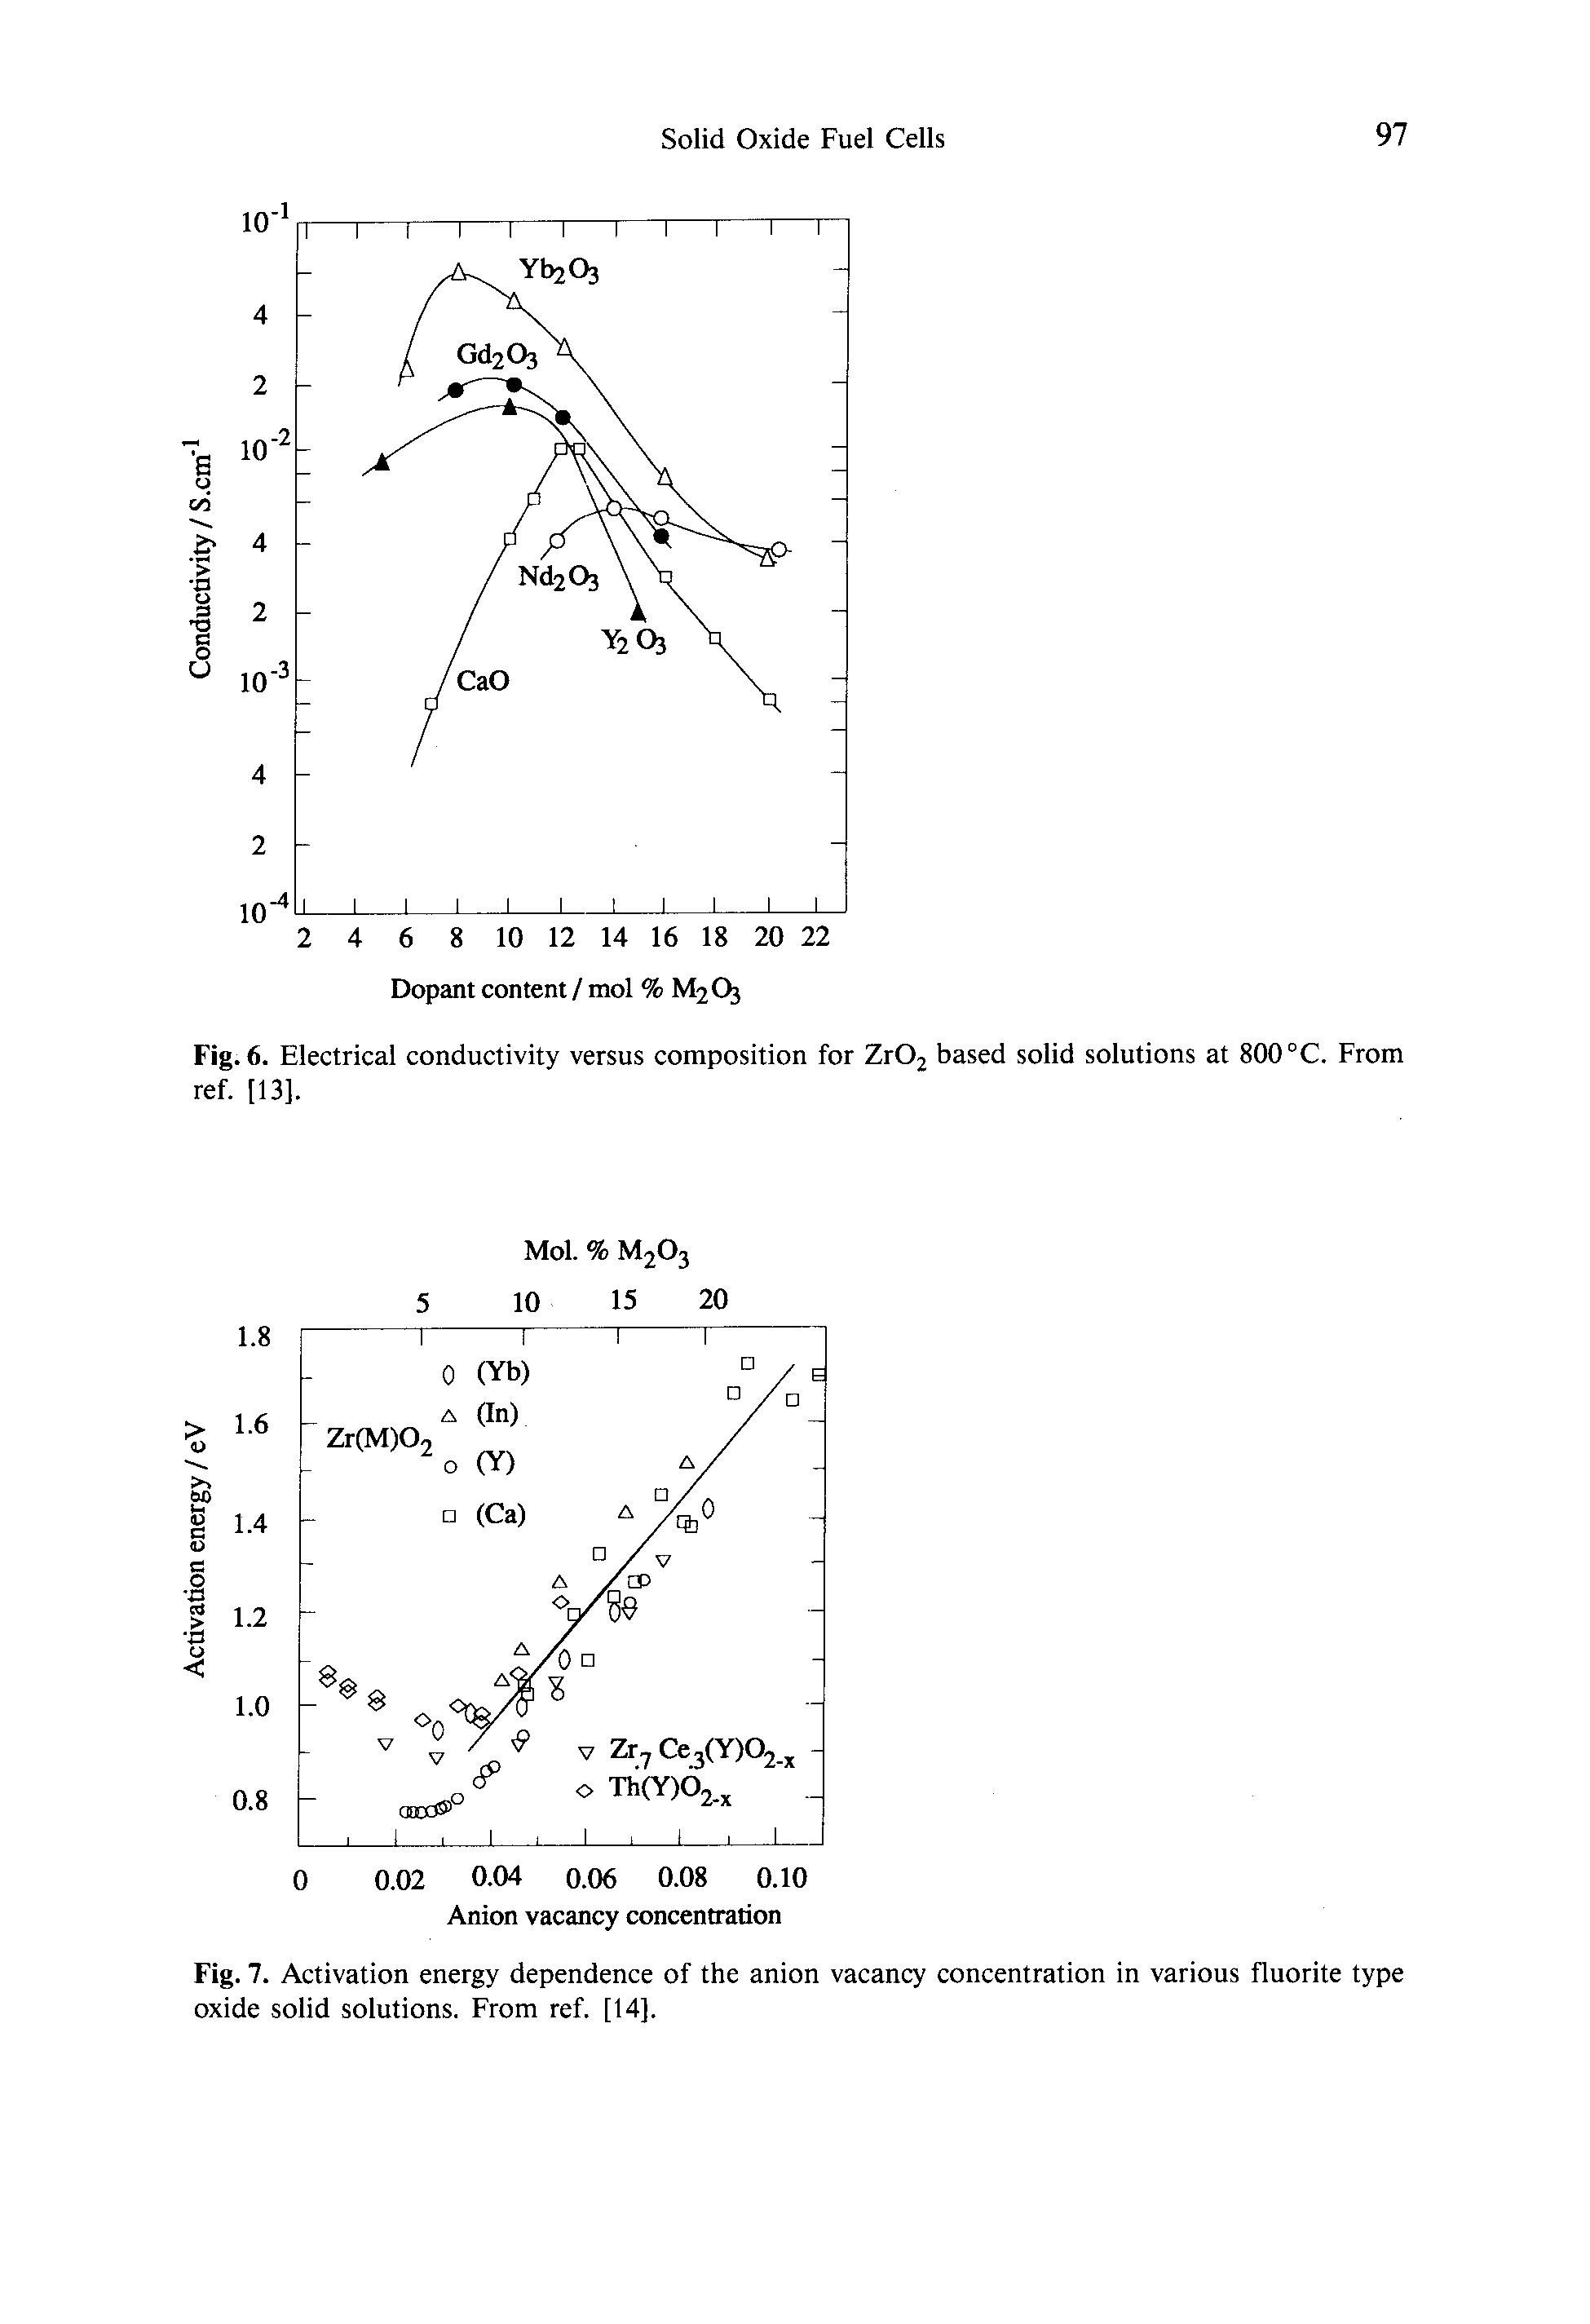 Fig. 7. Activation energy dependence of the anion vacancy concentration in various fluorite type oxide solid solutions. From ref. [14],...